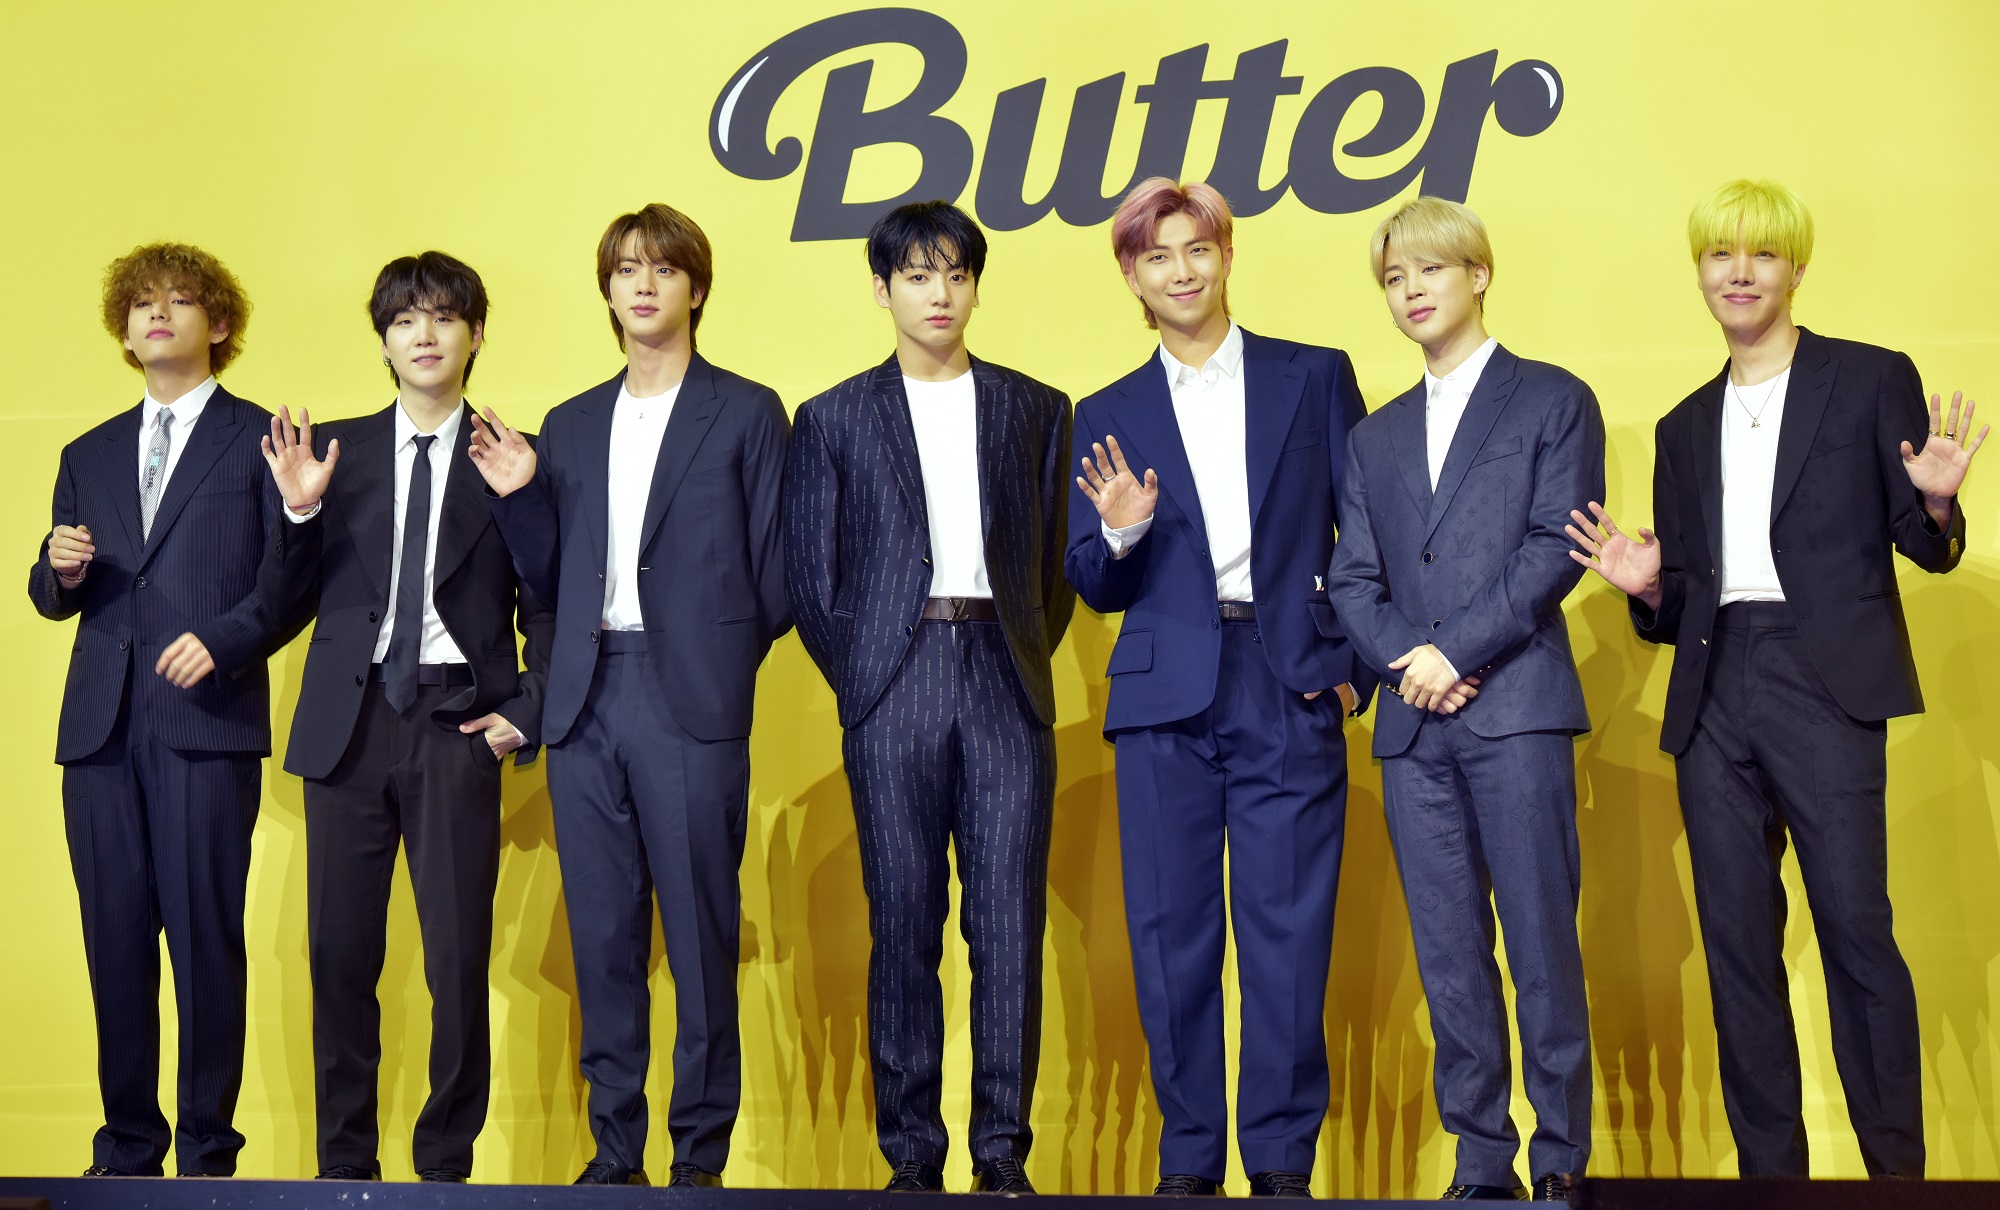 V, Suga, Jin, Jungkook, RM, Jimin, and J-Hope stand in front of a yellow backdrop with the word 'Butter'